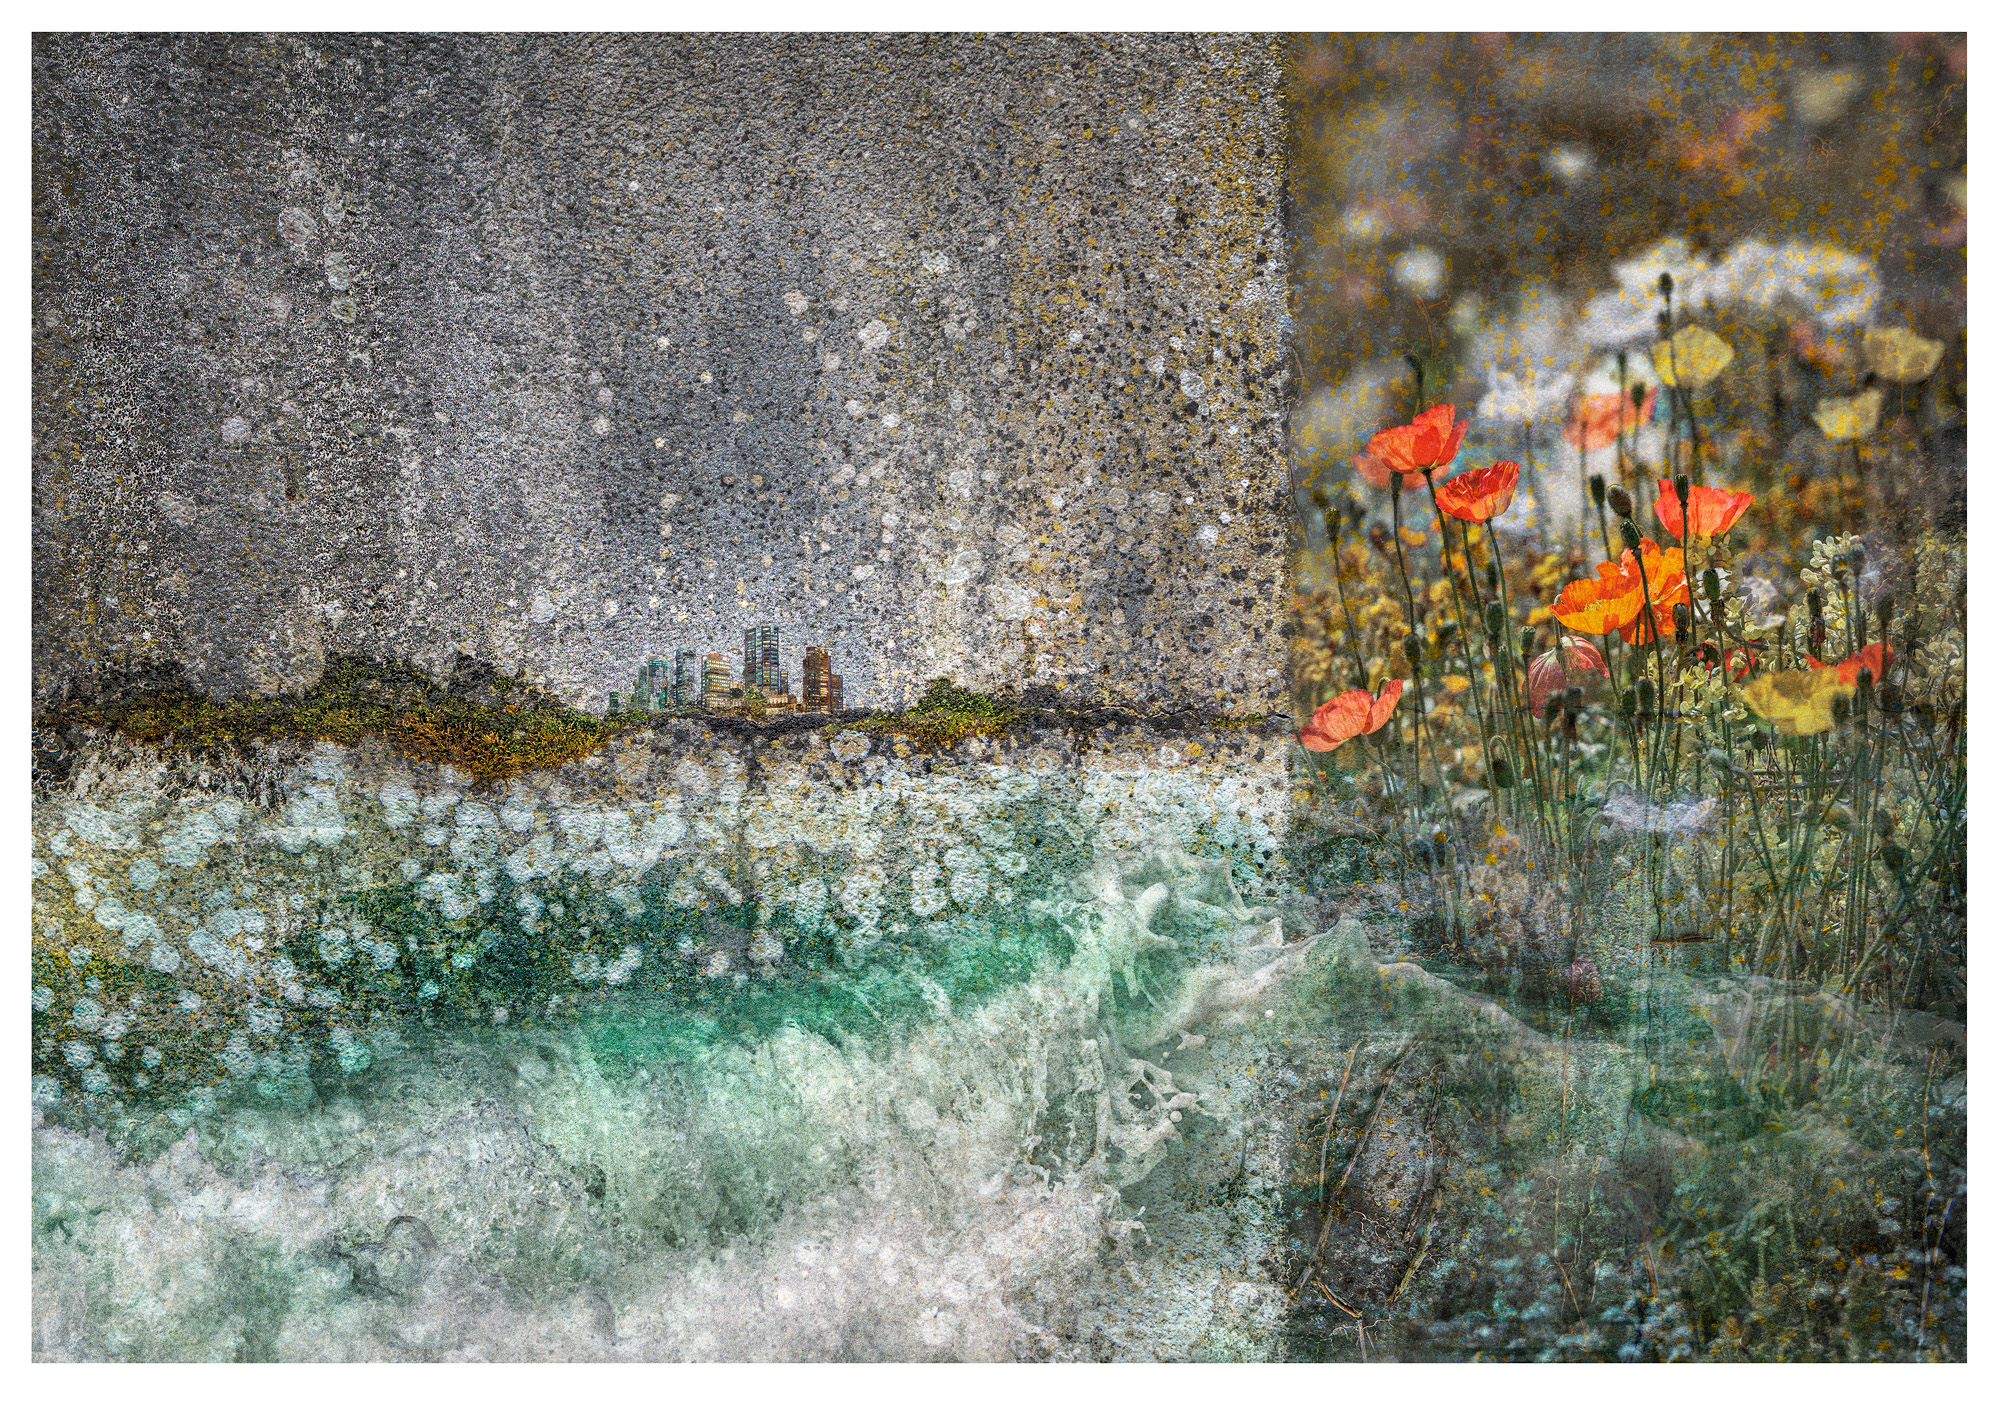 Composite photograph of weathered wall part painted blue, bottom right black and dirty.A building site with cranes, two deer sky and a fingerprint have been added to create an urban landscape image to criticise human involvment